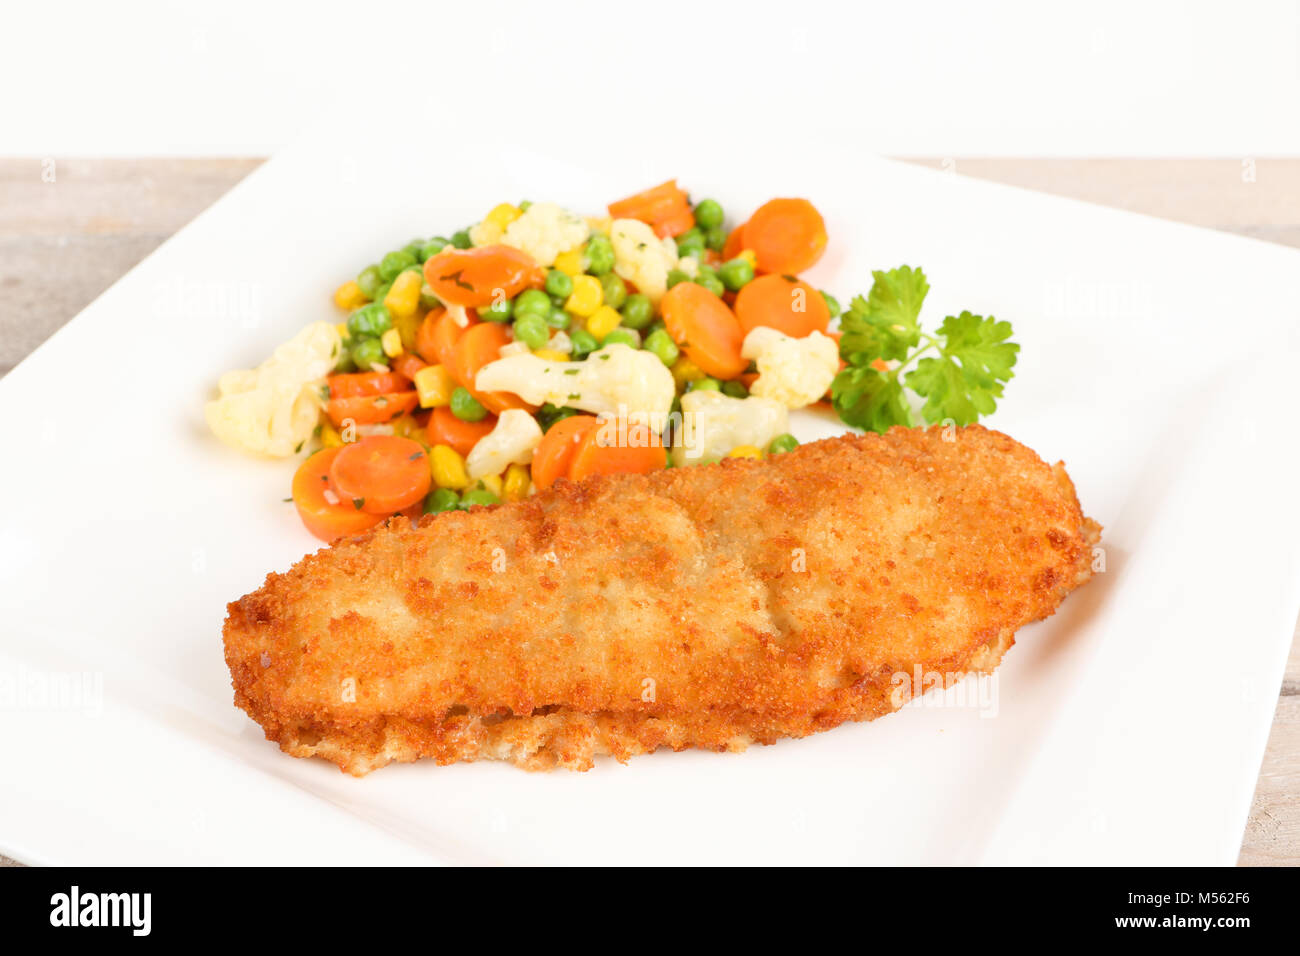 fried fish with vegetable Stock Photo